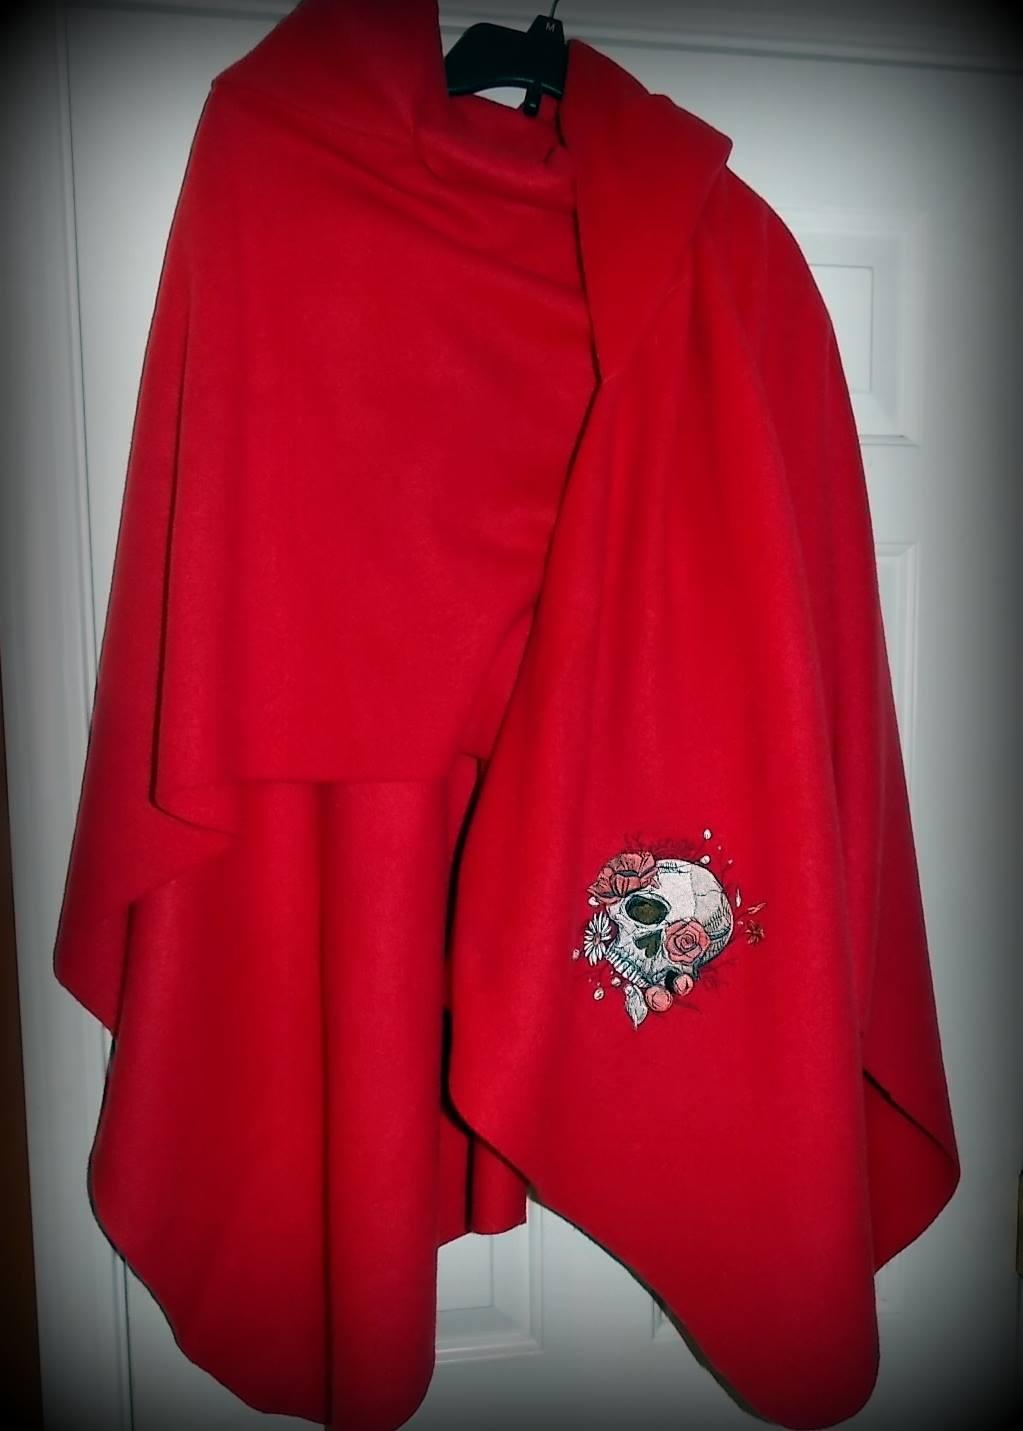 Embroidered scarf with Skull design